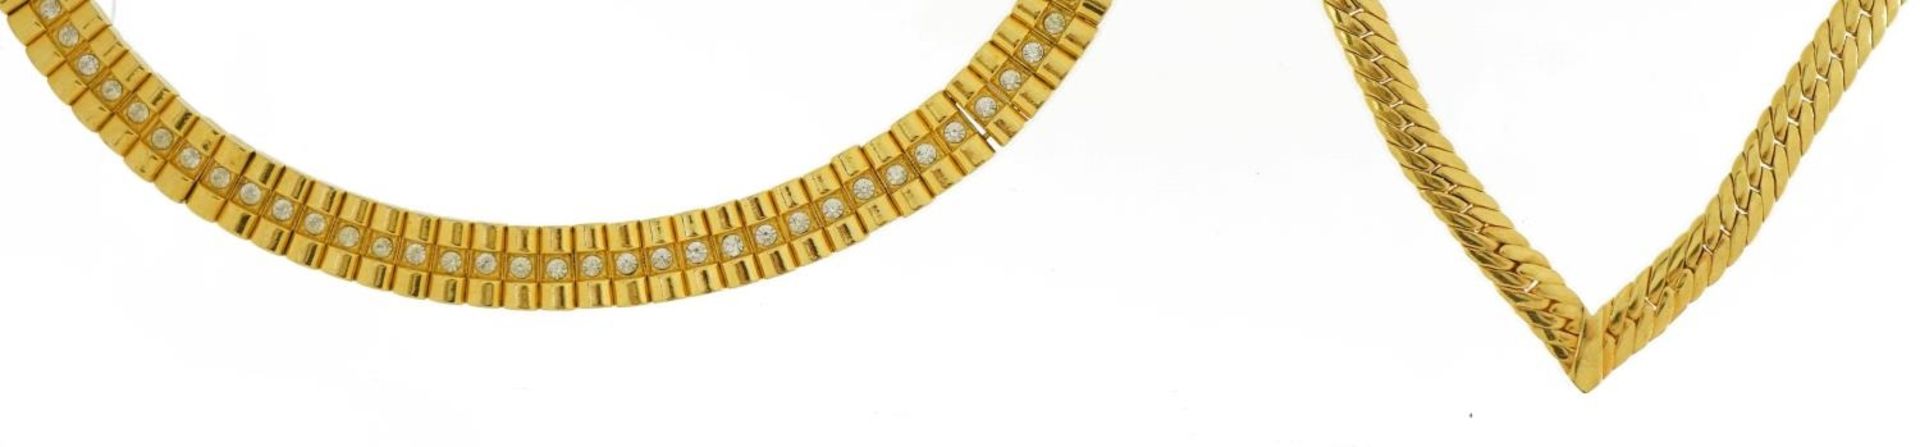 Vintage Joan Rivers gold plated necklace set with clear stones and one other, the Joan Rivers